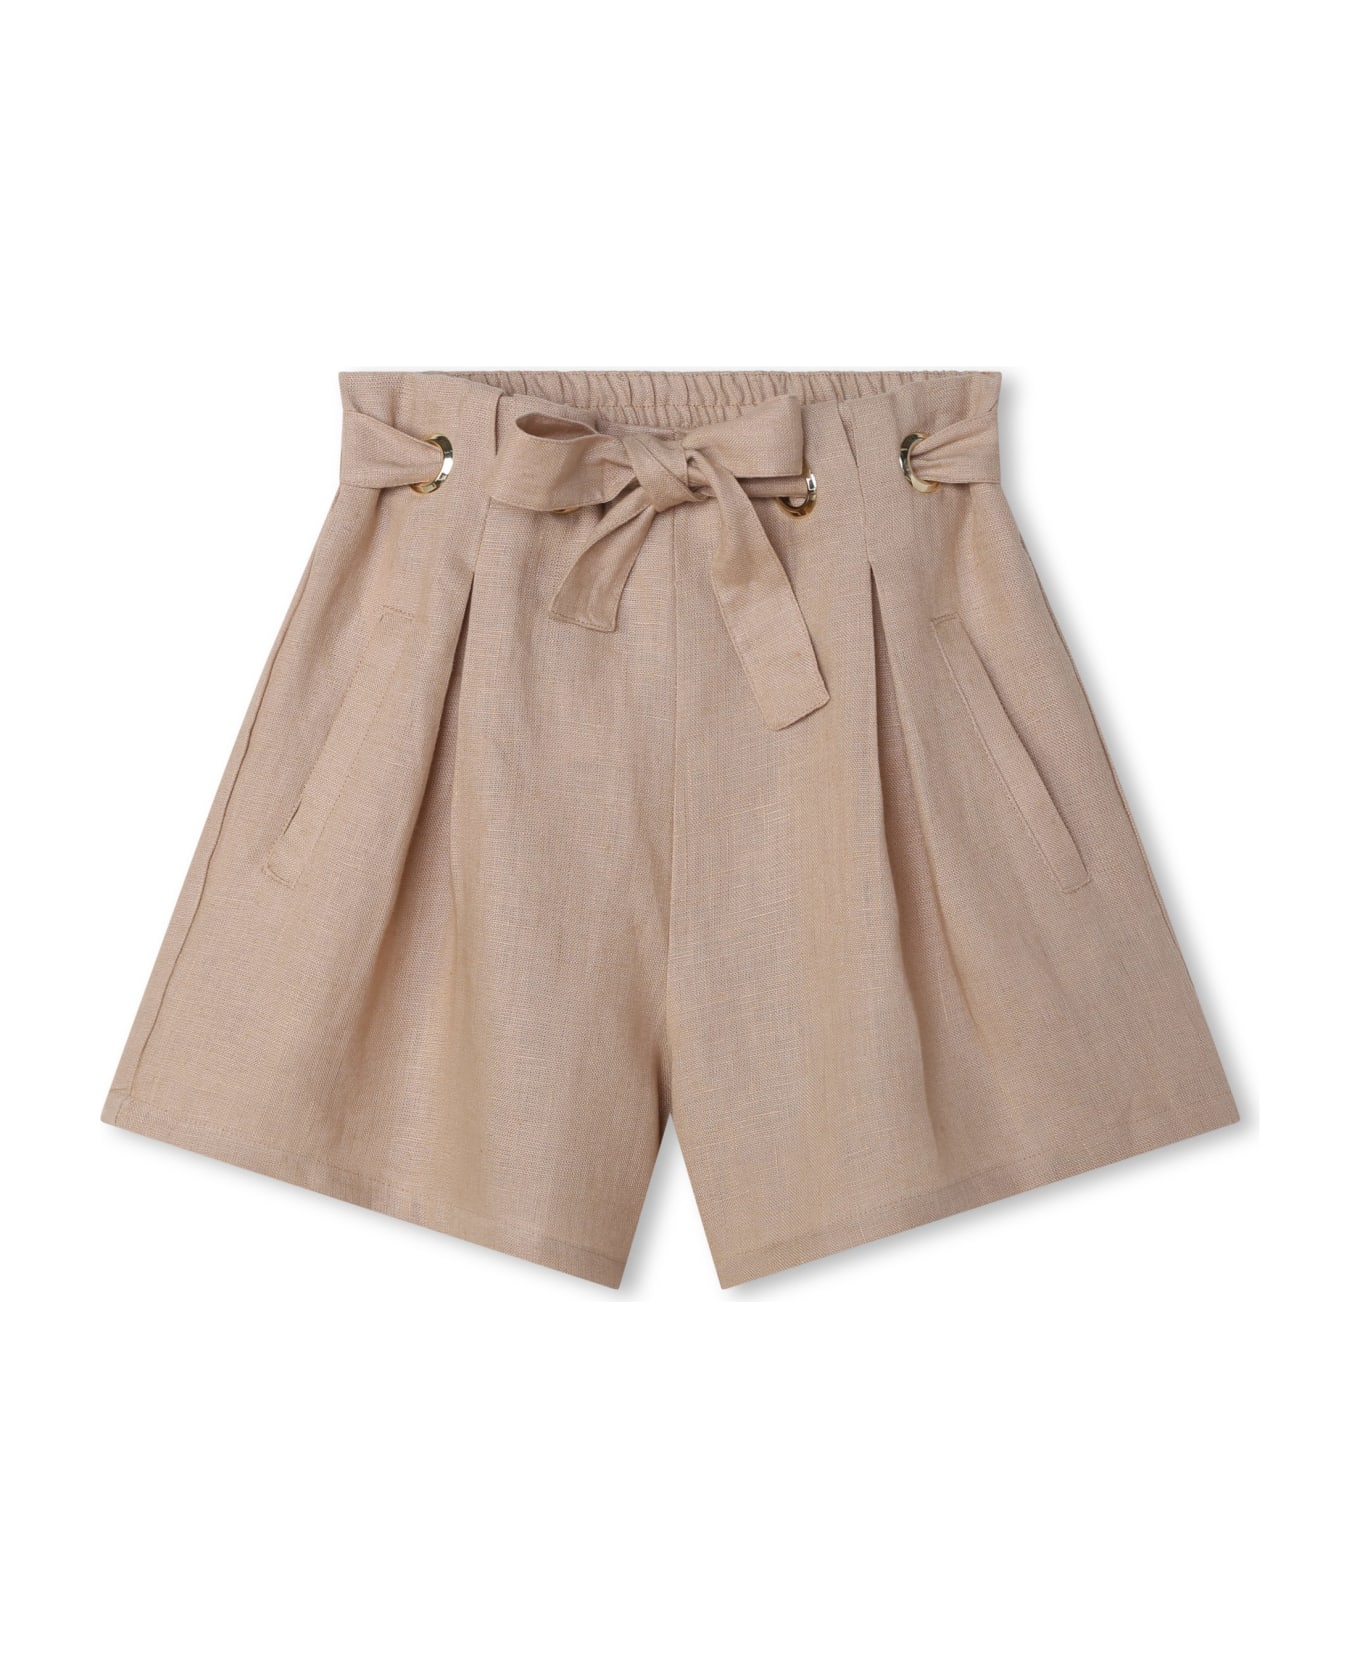 Chloé Bermuda Shorts With Embroidery - Beige